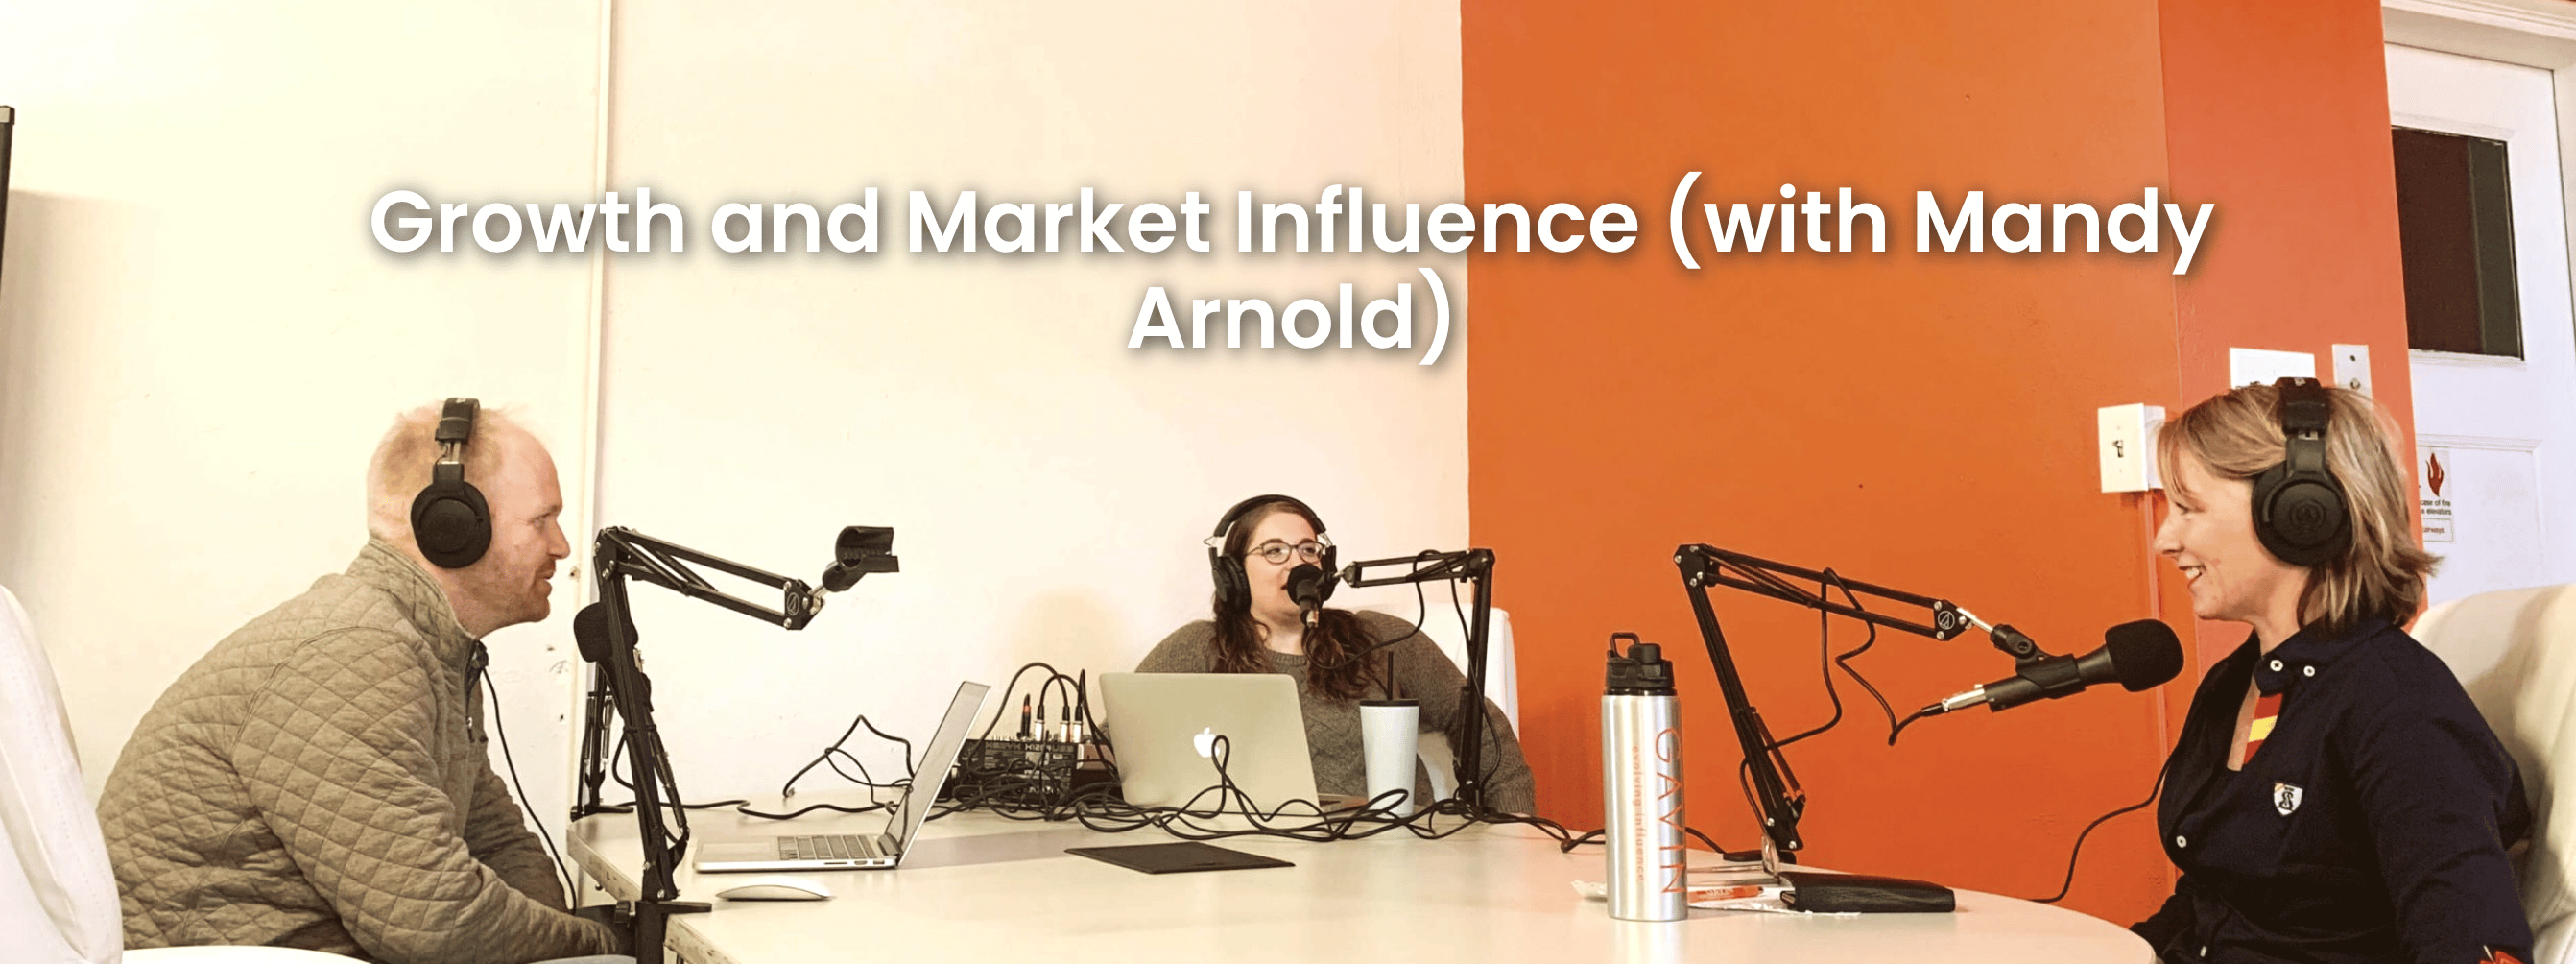 Growth and Market Influence (with Mandy and Arnold) banner